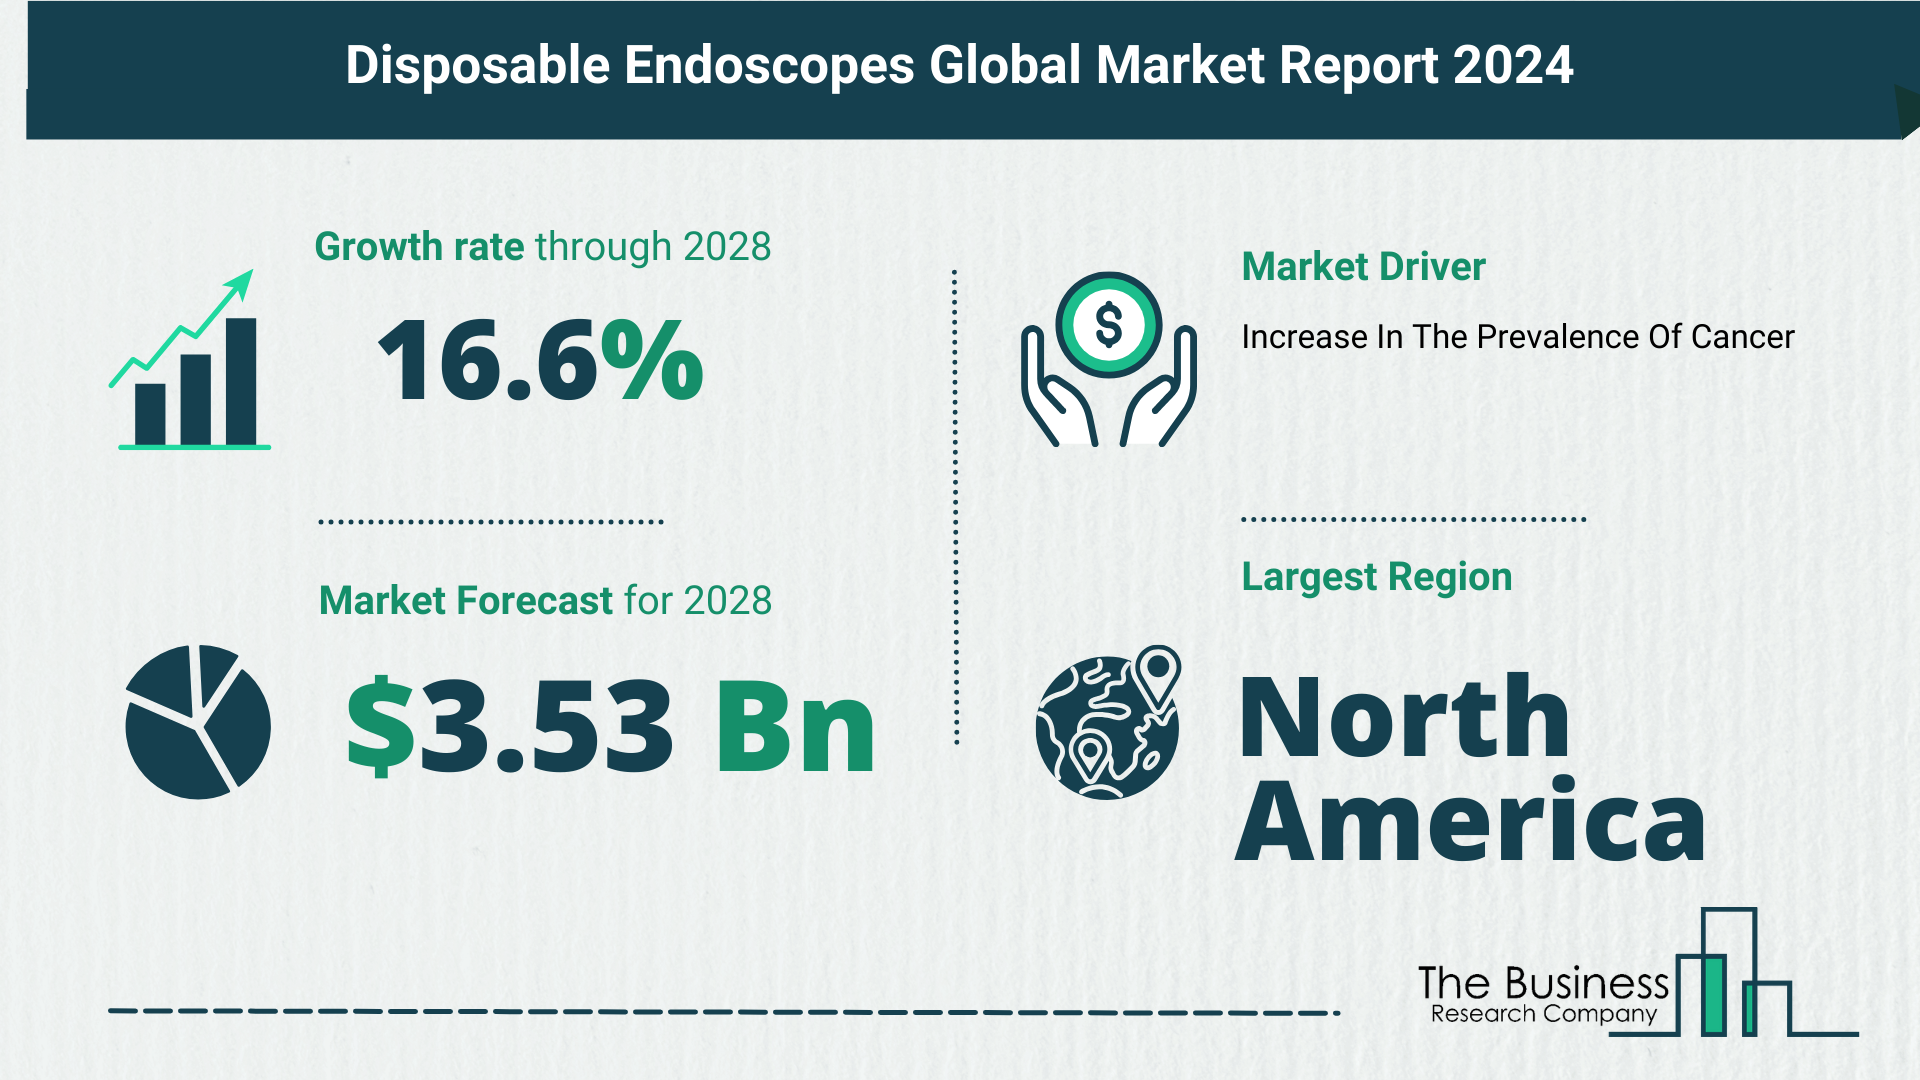 5 Key Insights On The Disposable Endoscopes Market 2024